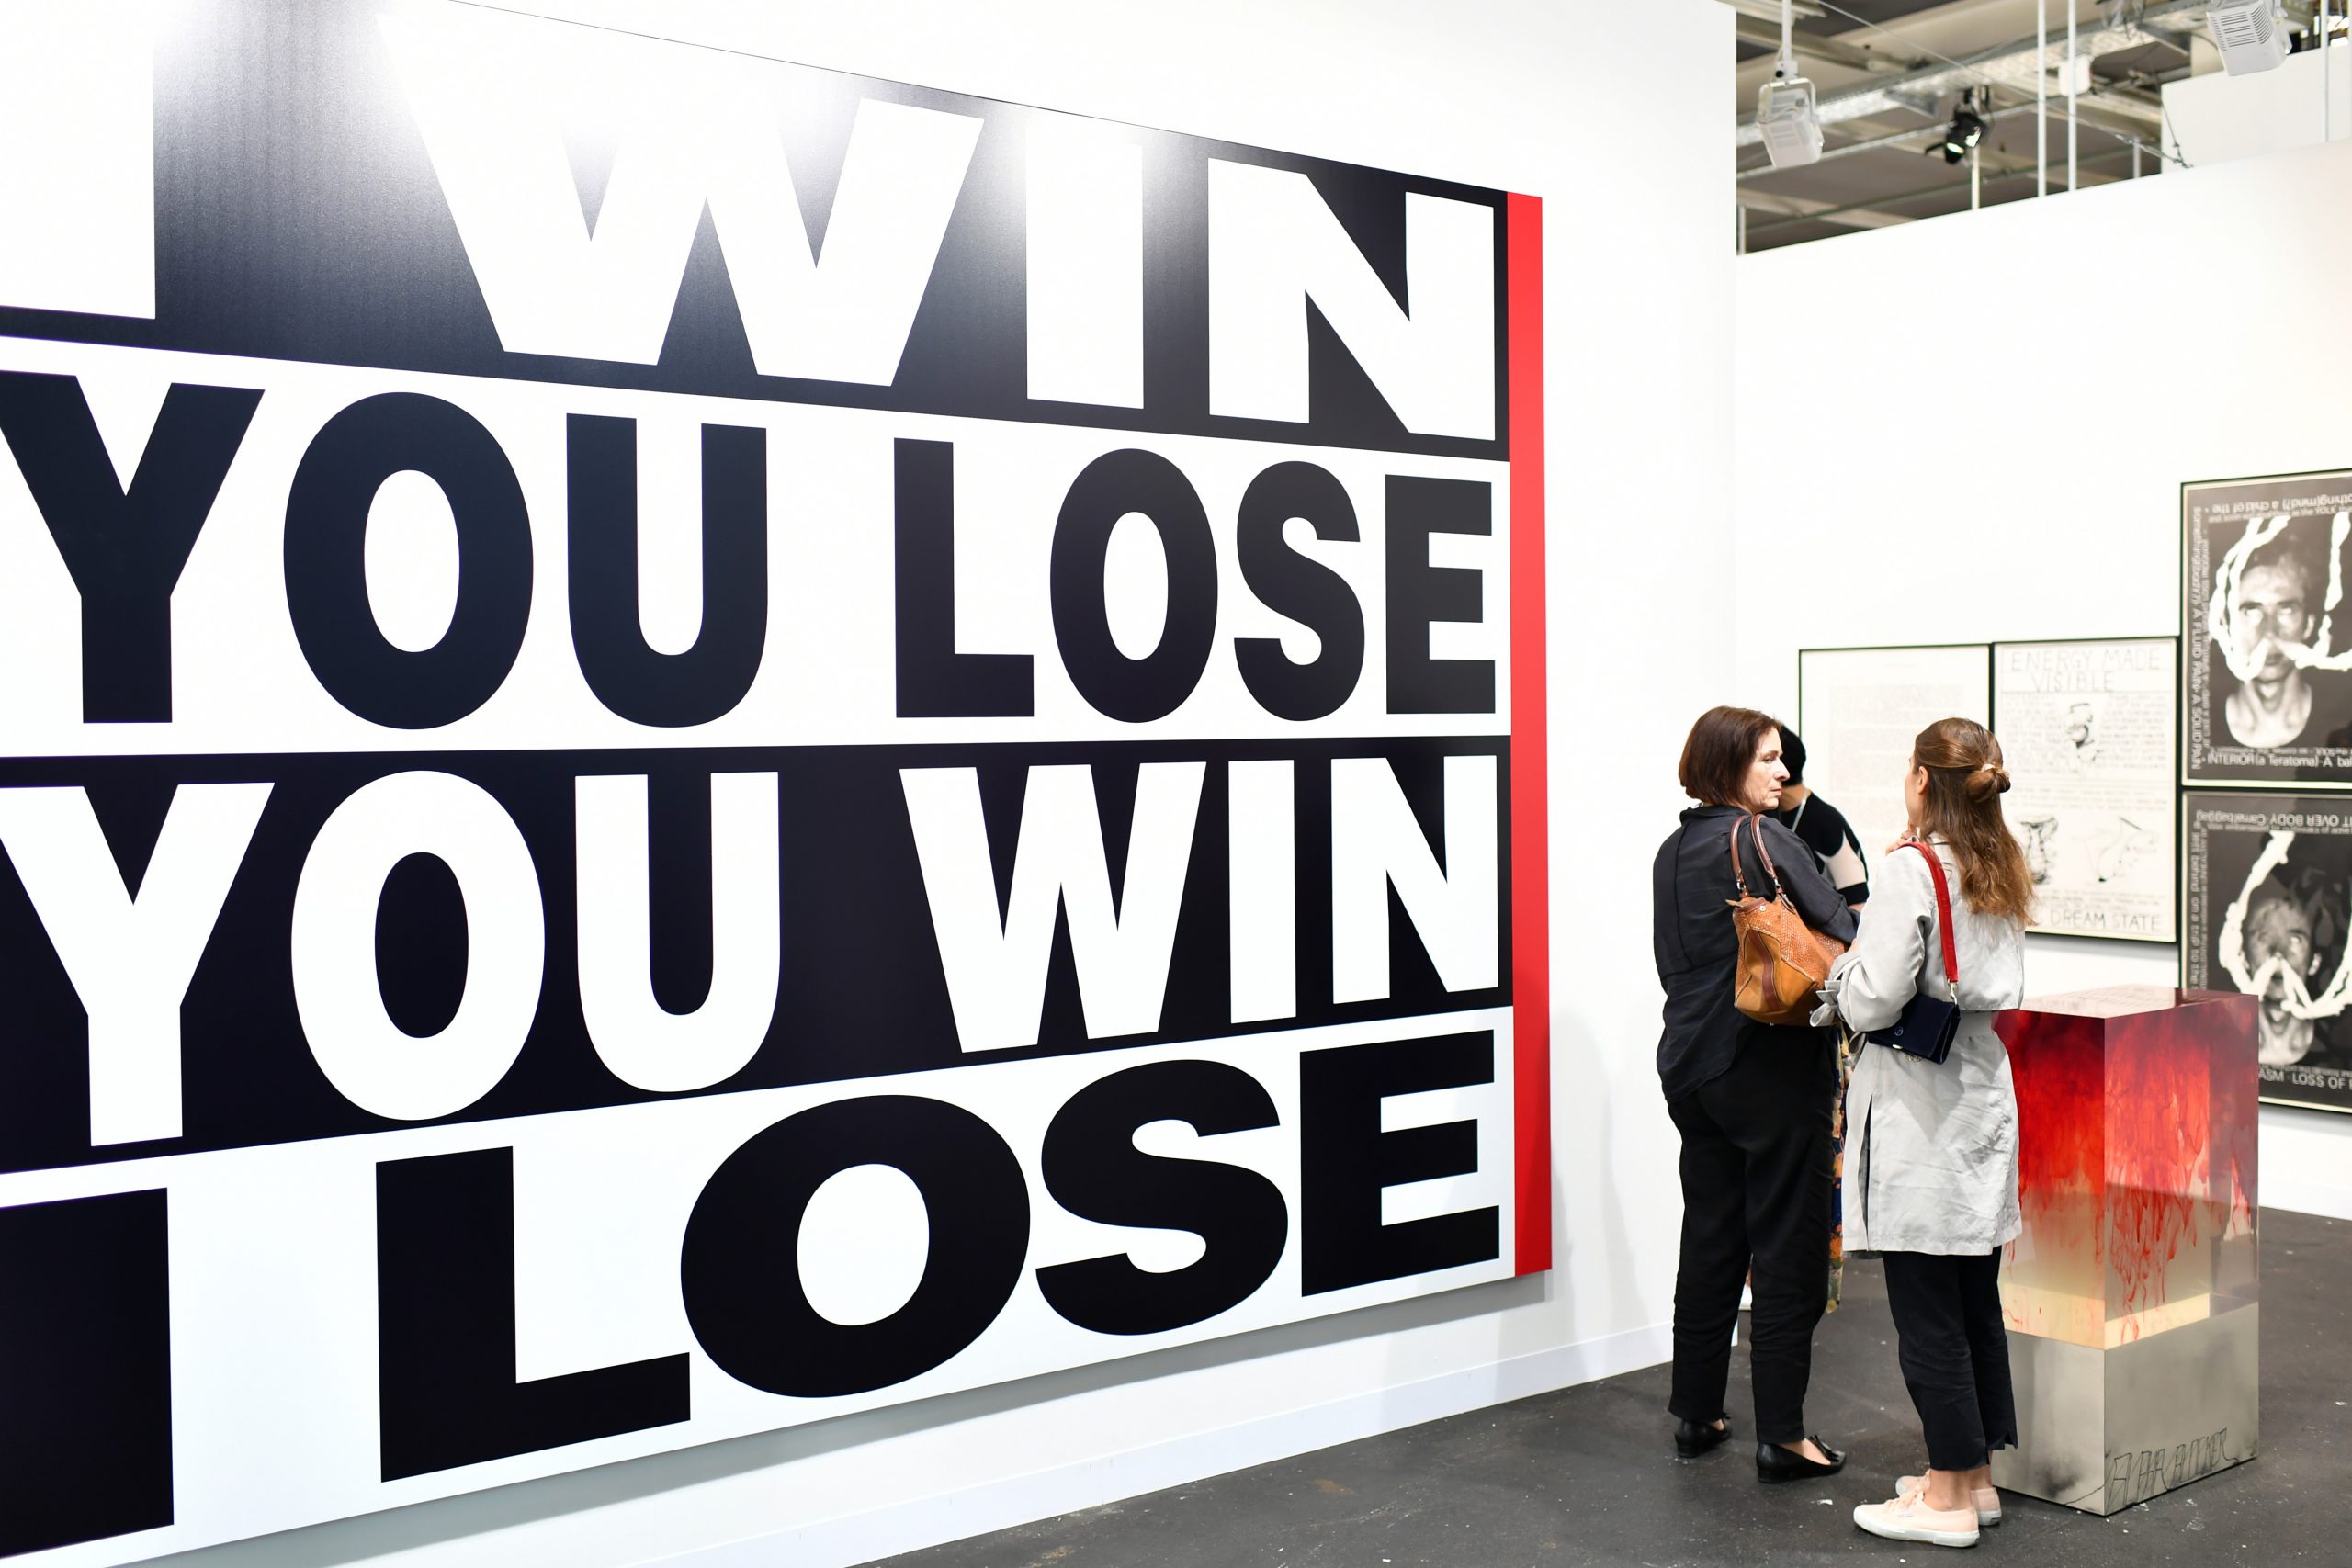 Visitors look at the artwork of Barbara Kruger "Untitled" during the press preview for Art Basel at Basel Messe on June 13, 2018 in Basel, Switzerland. Photo by Harold Cunningham/Getty Images.